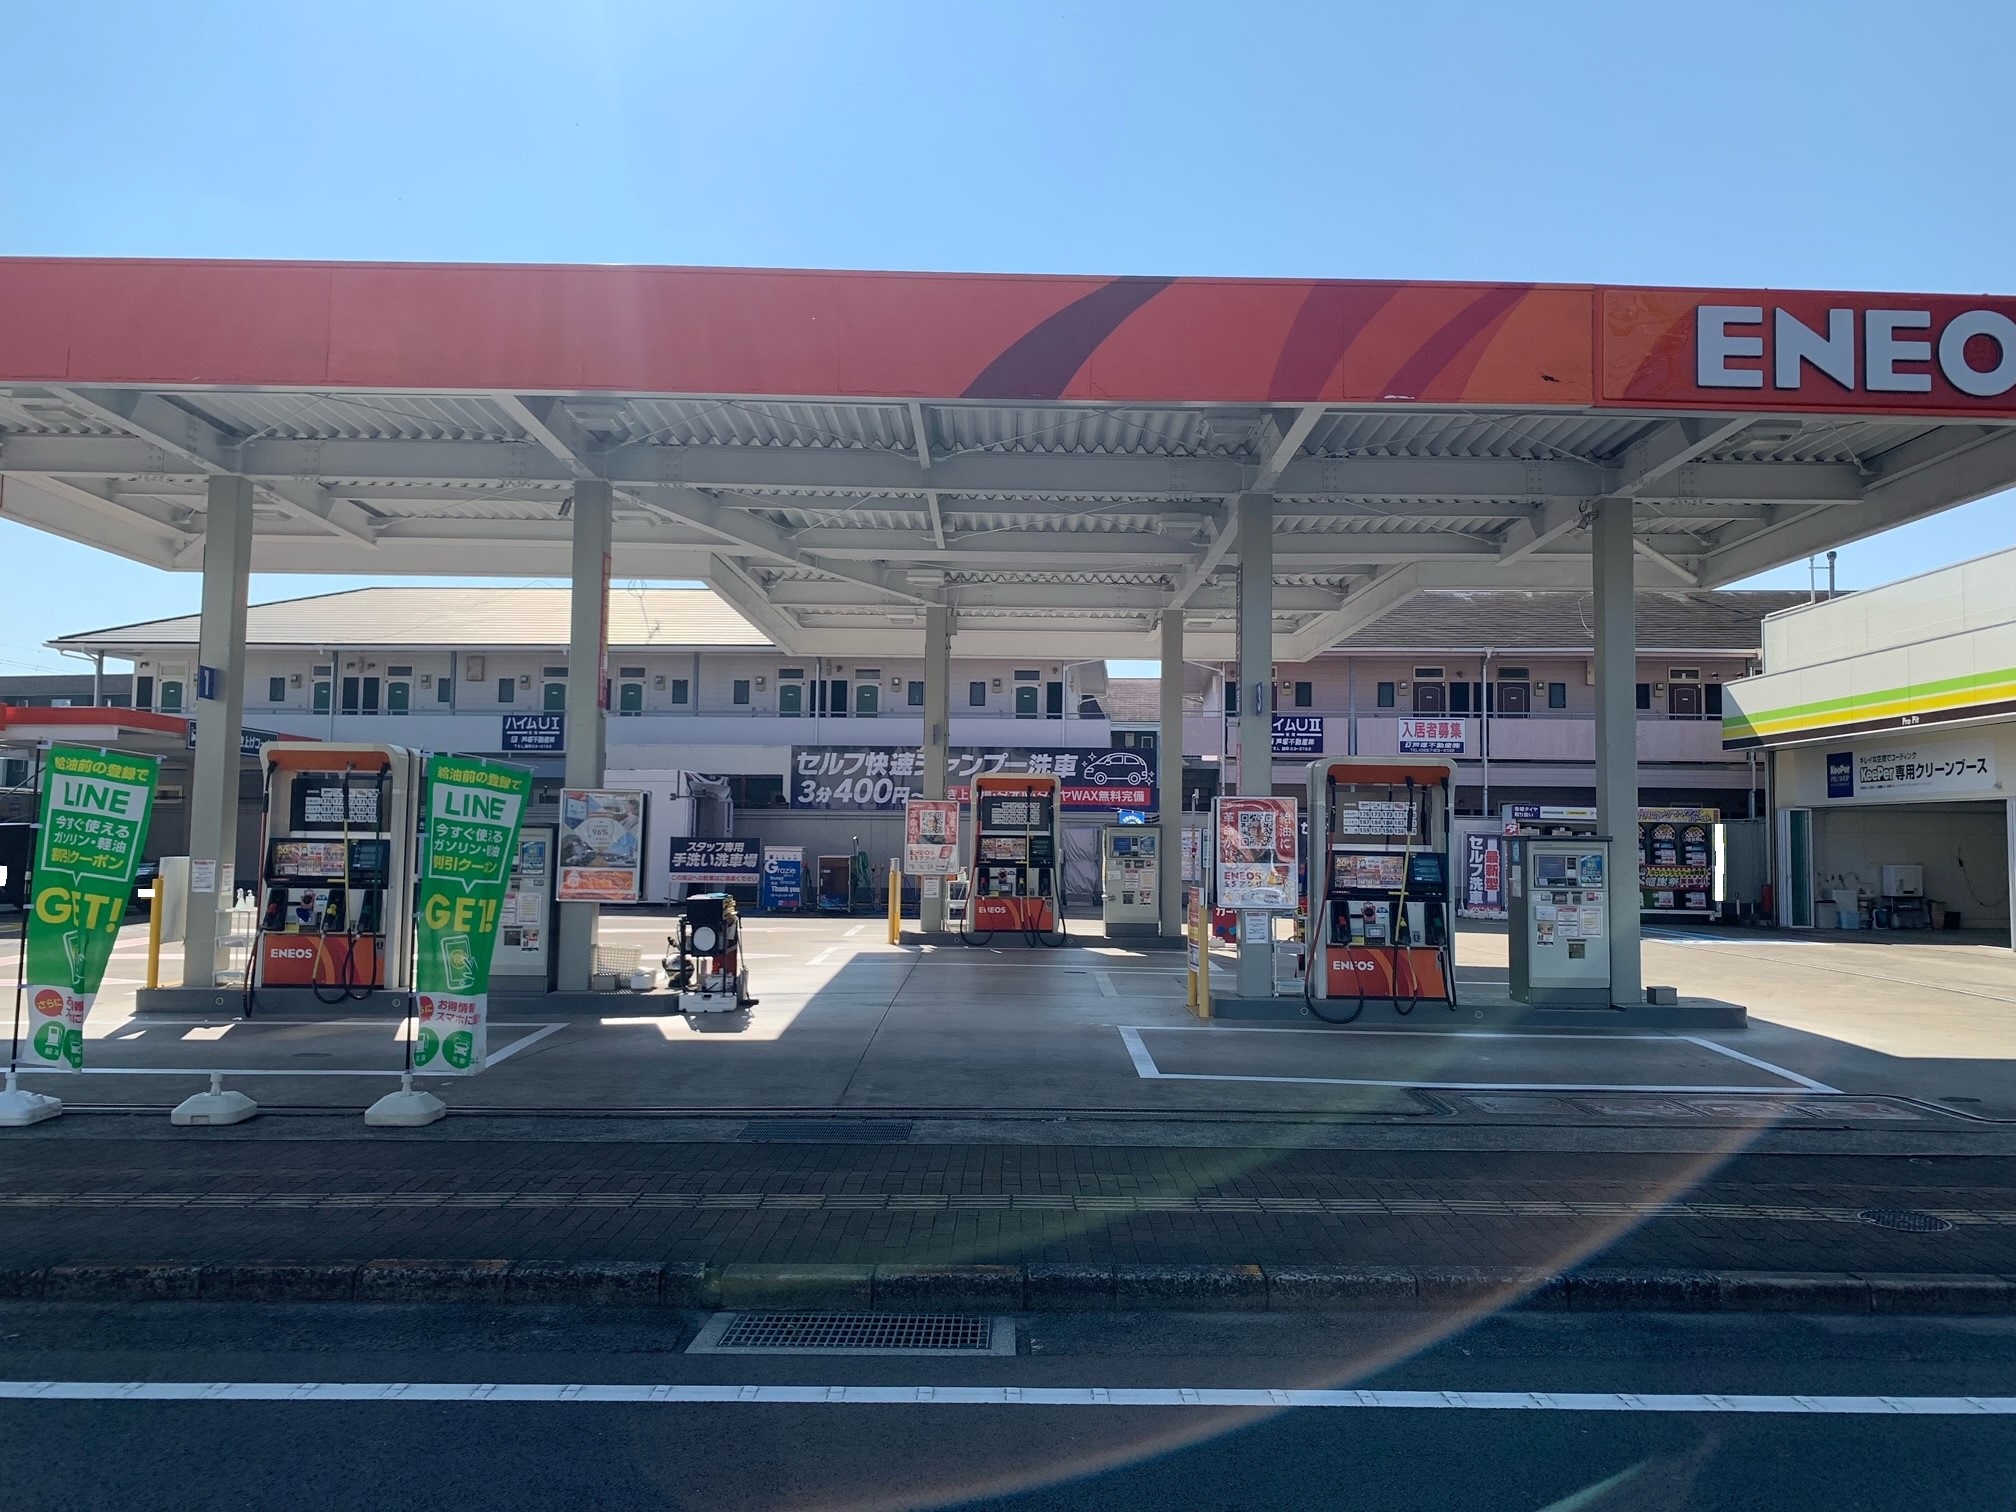 Images ENEOS Dr.Driveセルフ小川町店(ENEOSフロンティア)